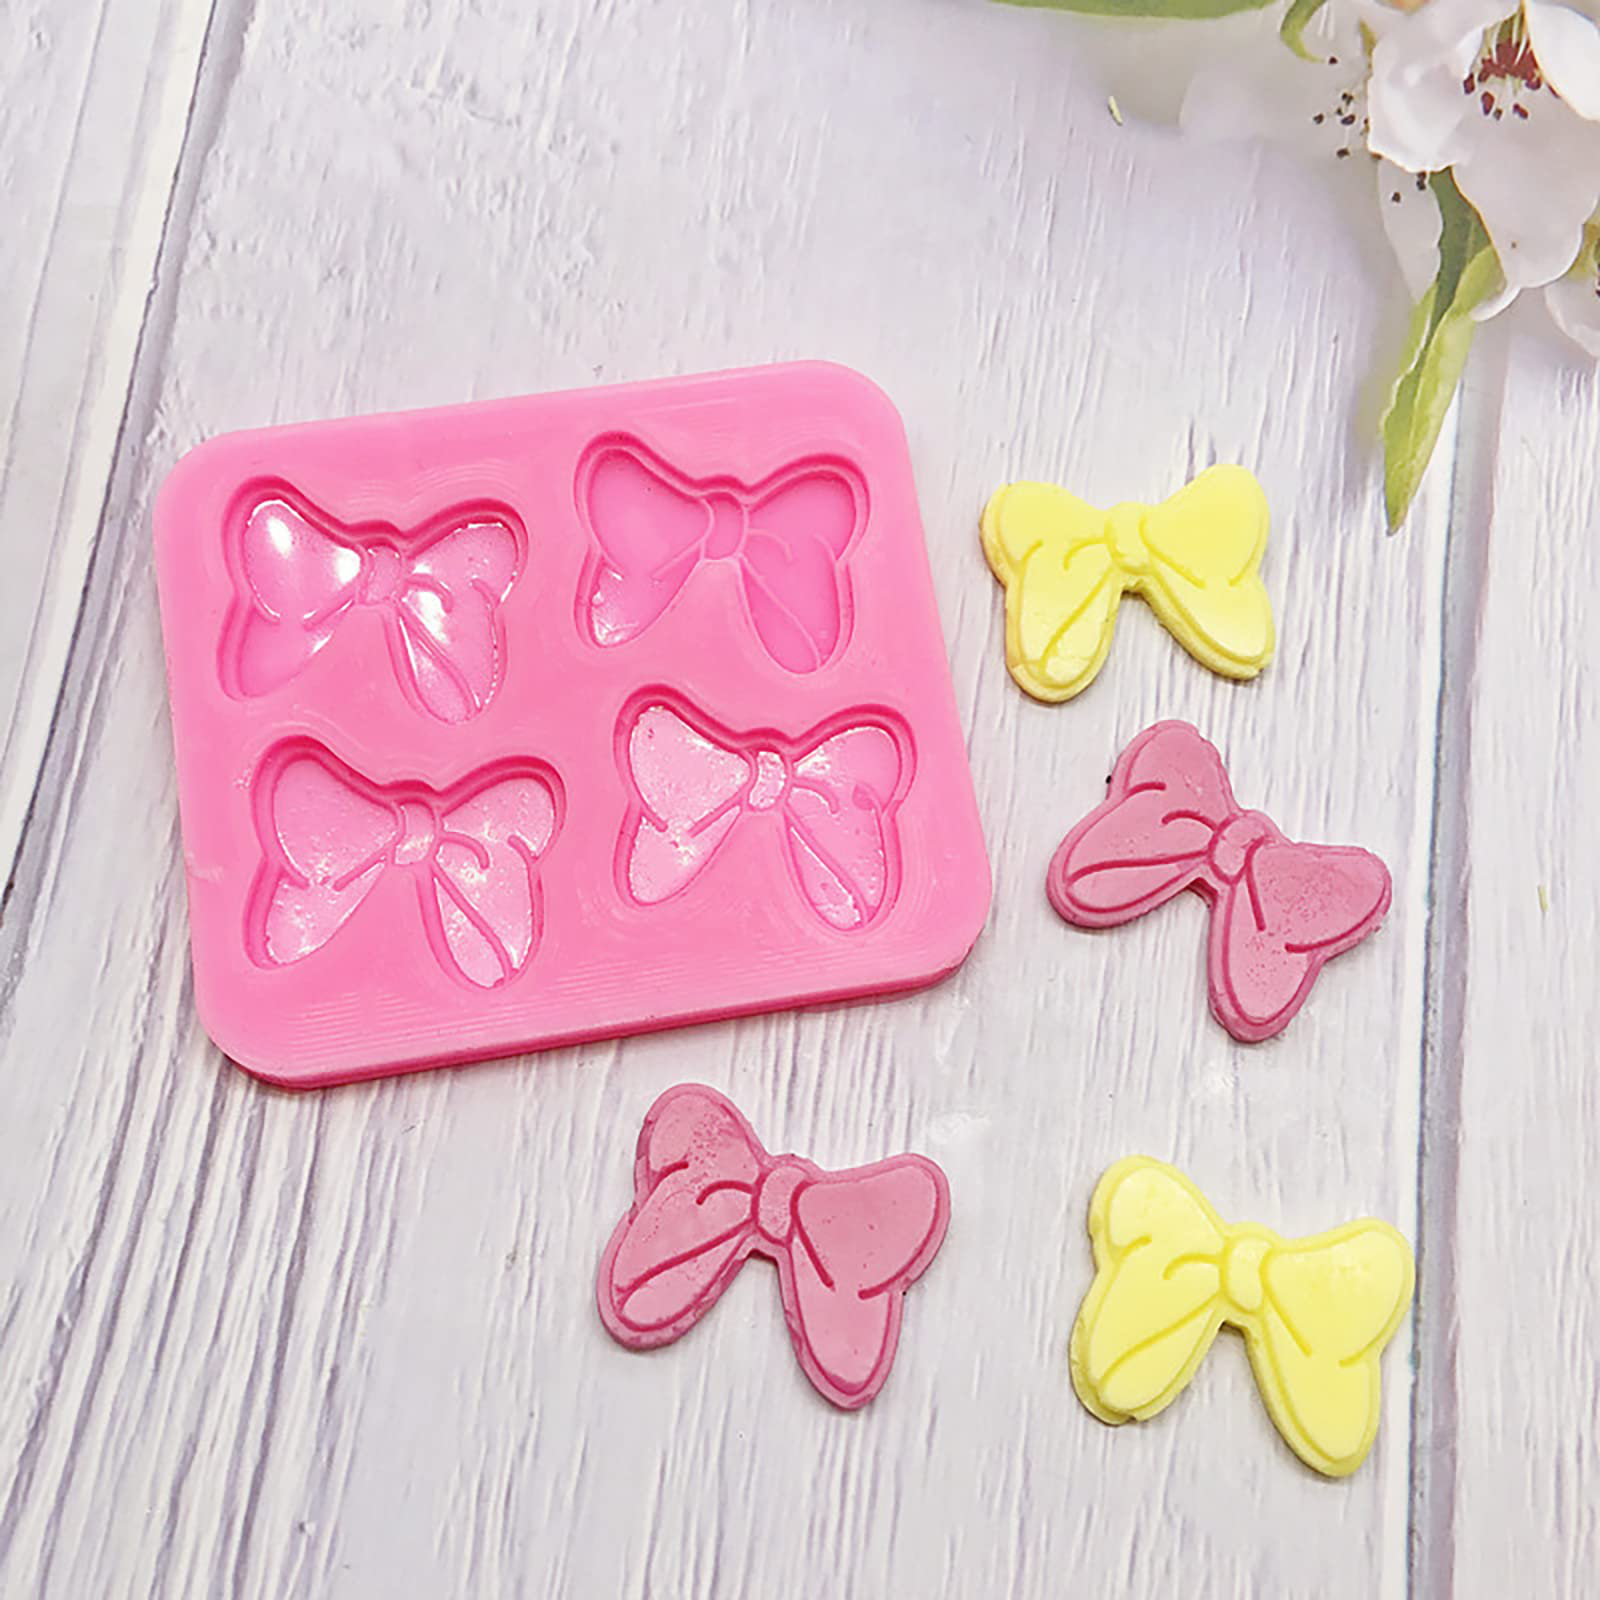 Silicone Cake Mold Butterfly Bow-Knot Design Fondant cake Decorating Mould Tools 